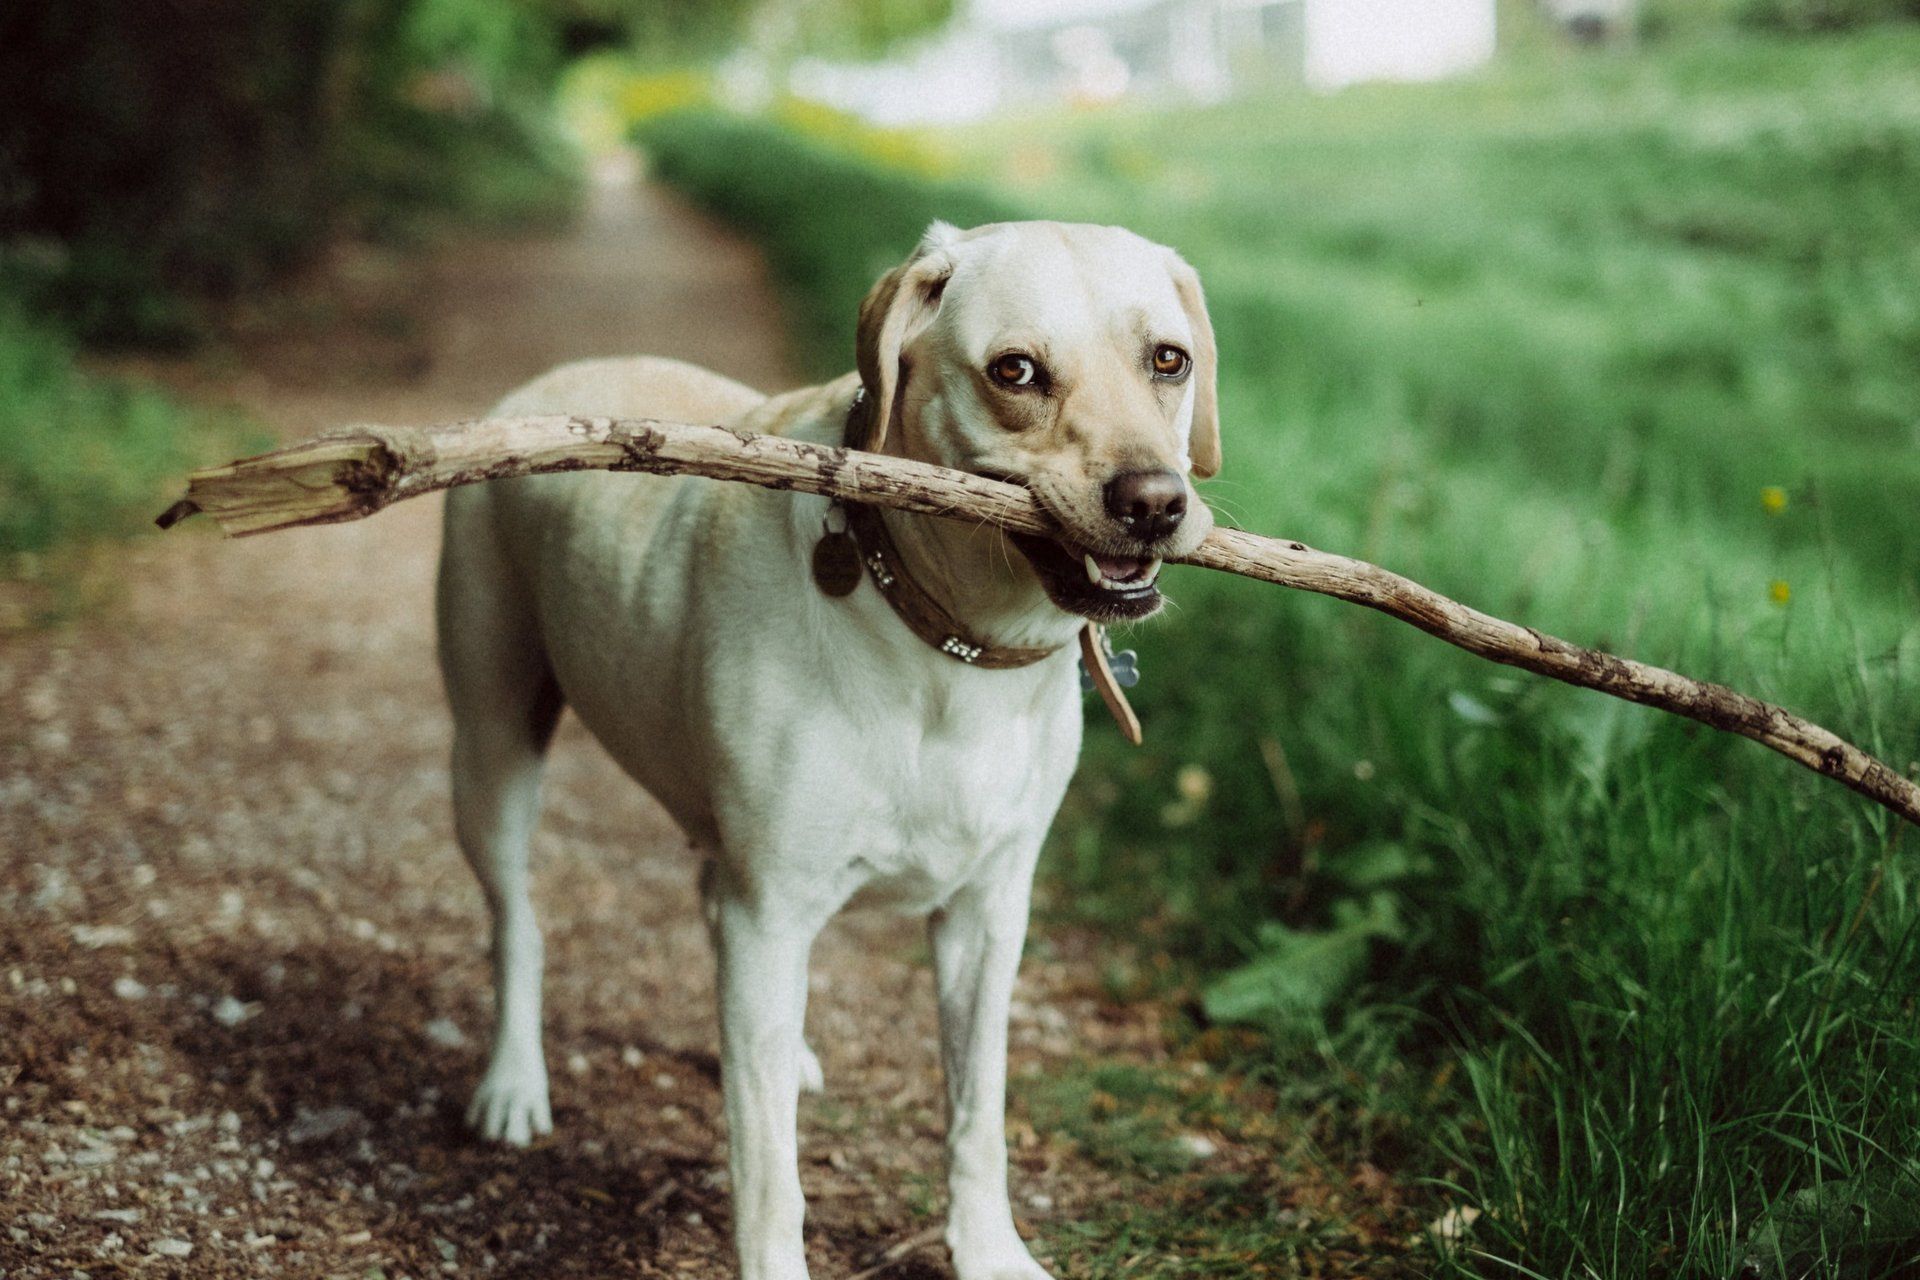 dog with large stick in mouth